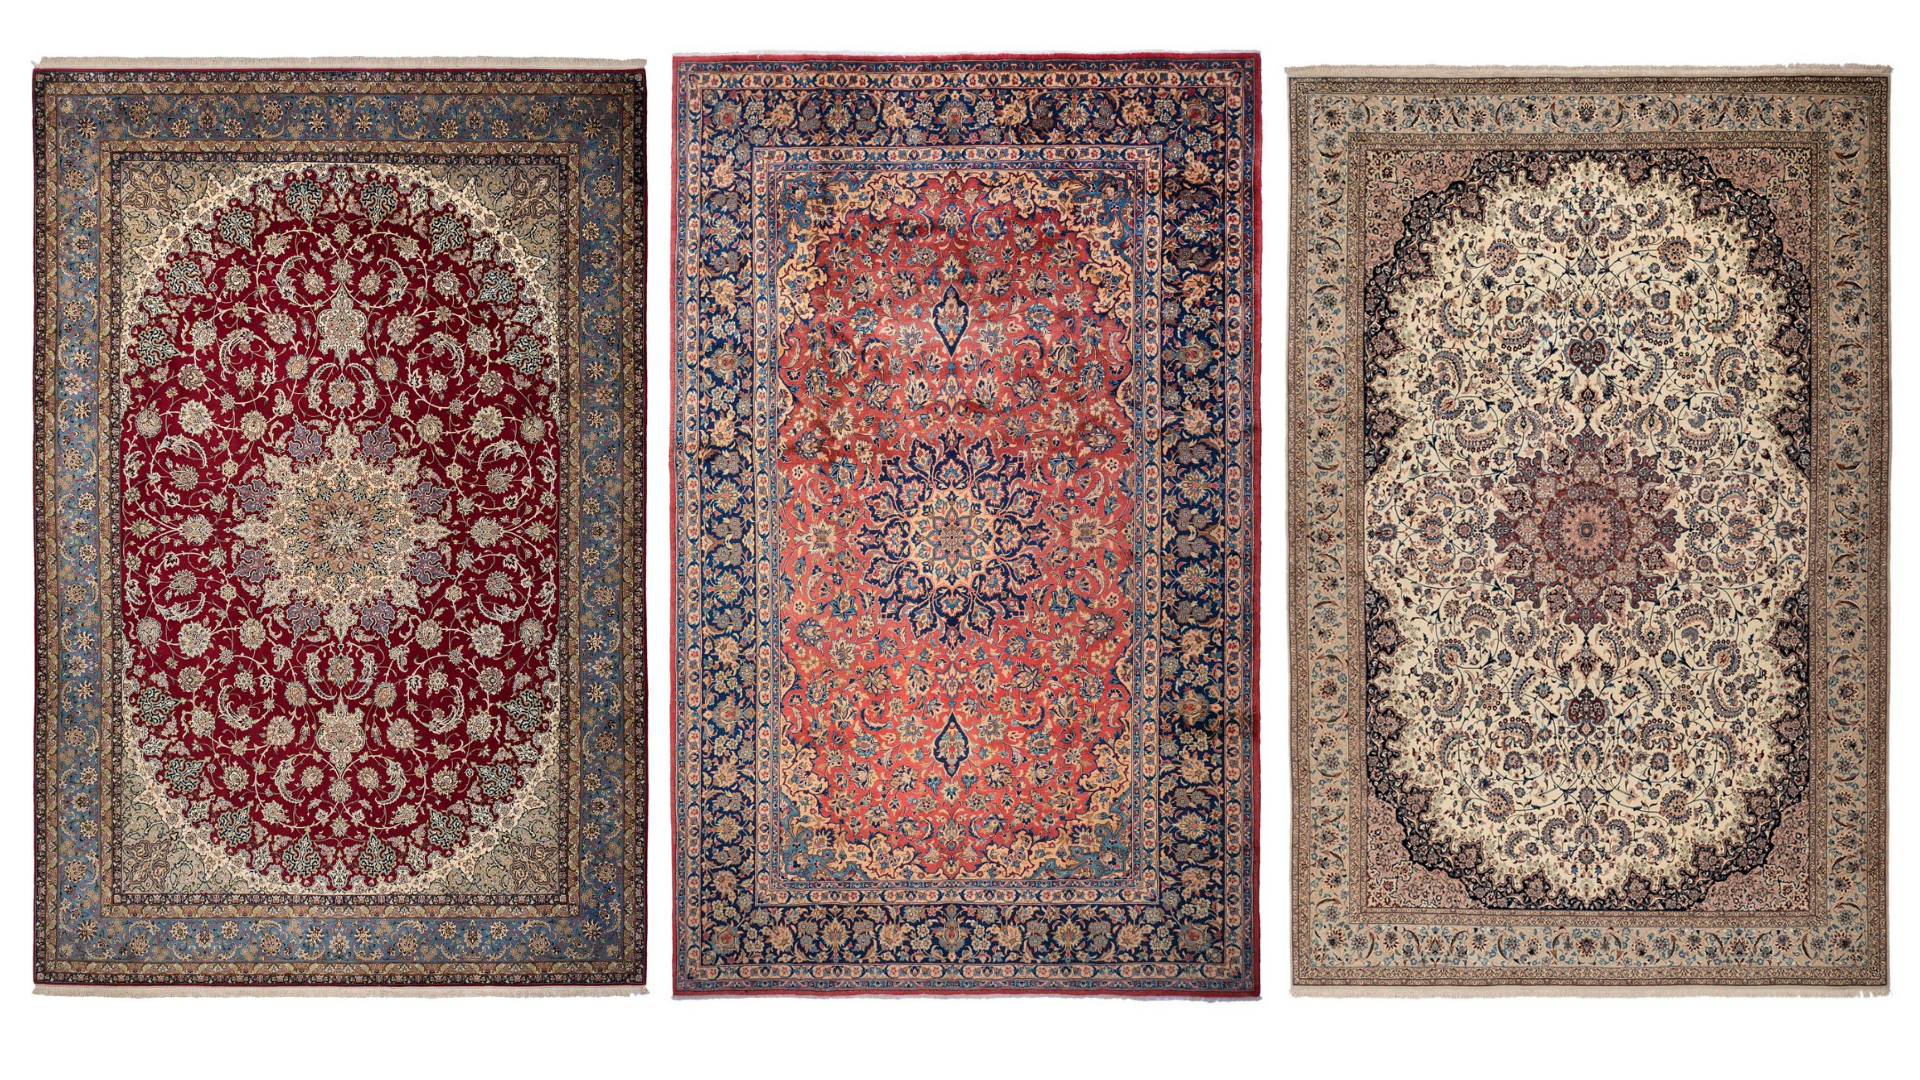 persian rugs, oriental rugs, home accessories, home decor, rug encyclopedia, rug guide, interior decor, interior design, london rugs, uk rugs, rug collections